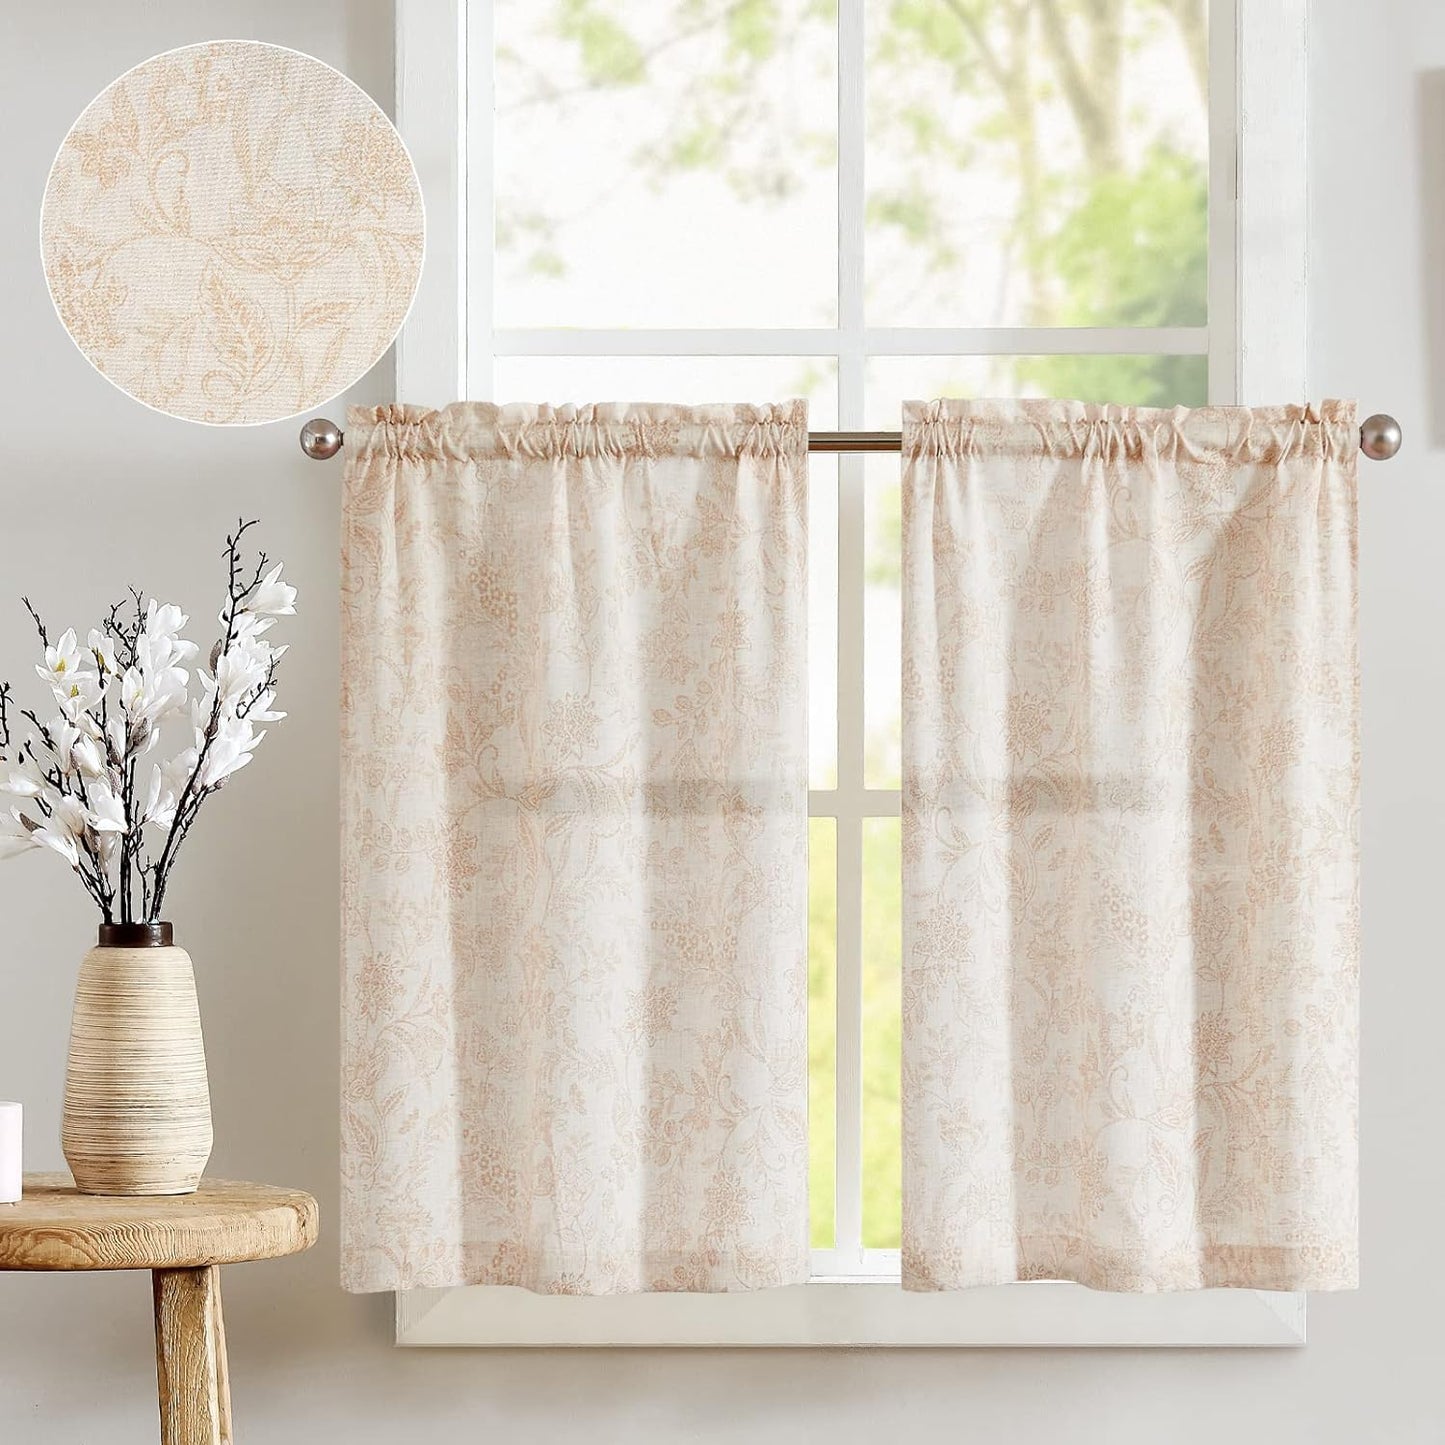 Jinchan Beige Kitchen Curtains Linen Tier Curtains 24 Inch Farmhouse Cafe Curtains Light Filtering Small Window Curtains Flax Country Rustic Rod Pocket Bathroom Laundry Room RV 2 Panels Crude  CKNY HOME FASHION Forest Taupe On Beige 24L 